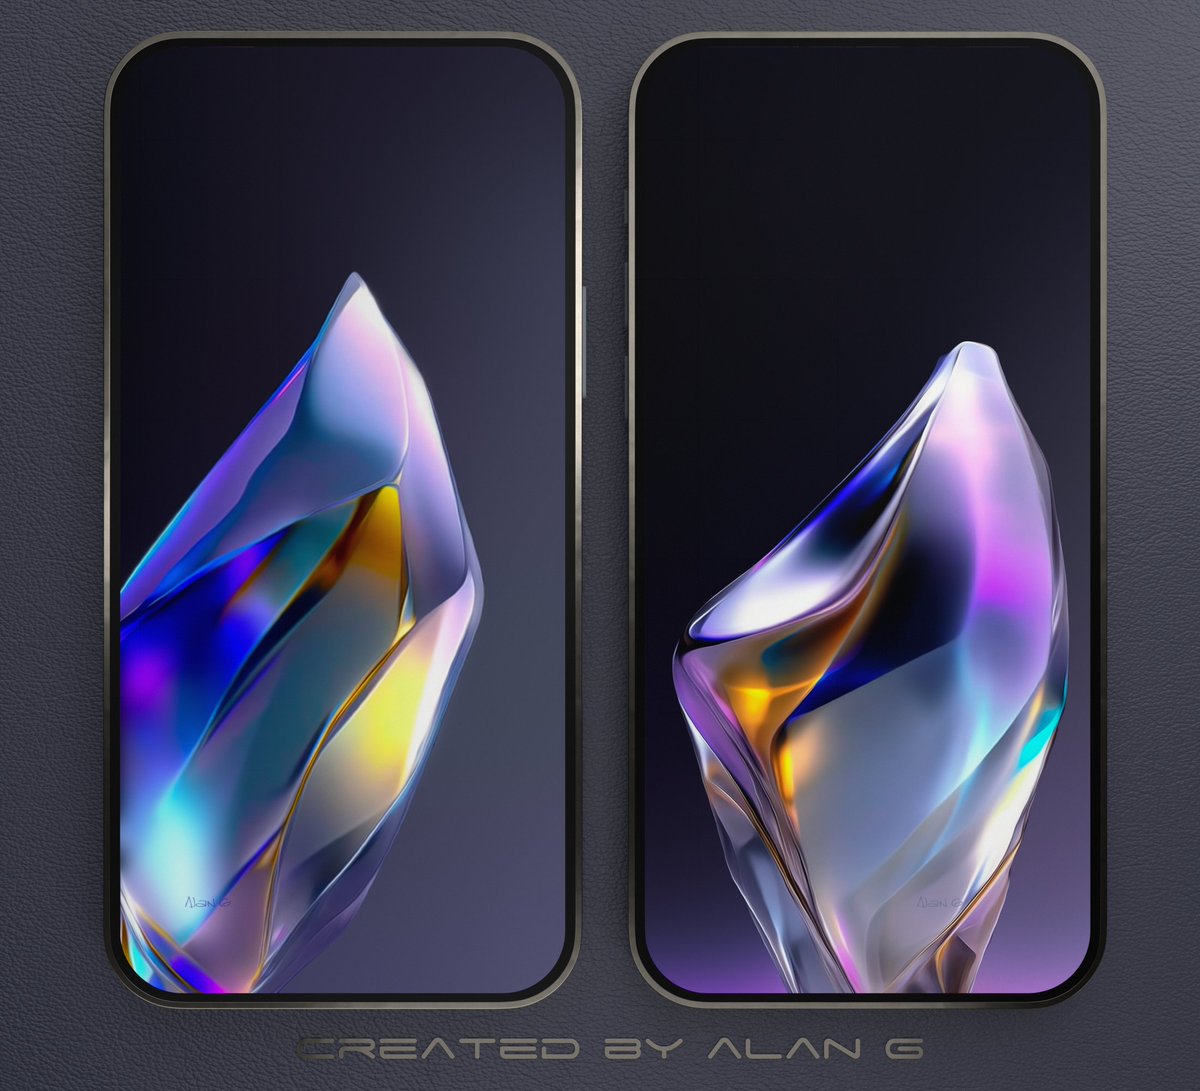 My new walls t.me/G_Walls/6134 #free #abstract #abstractart #iphone #3d #wallpapers #ios #ios16 #ios17 #android #android15 #pixel #telegram #telegramchannel